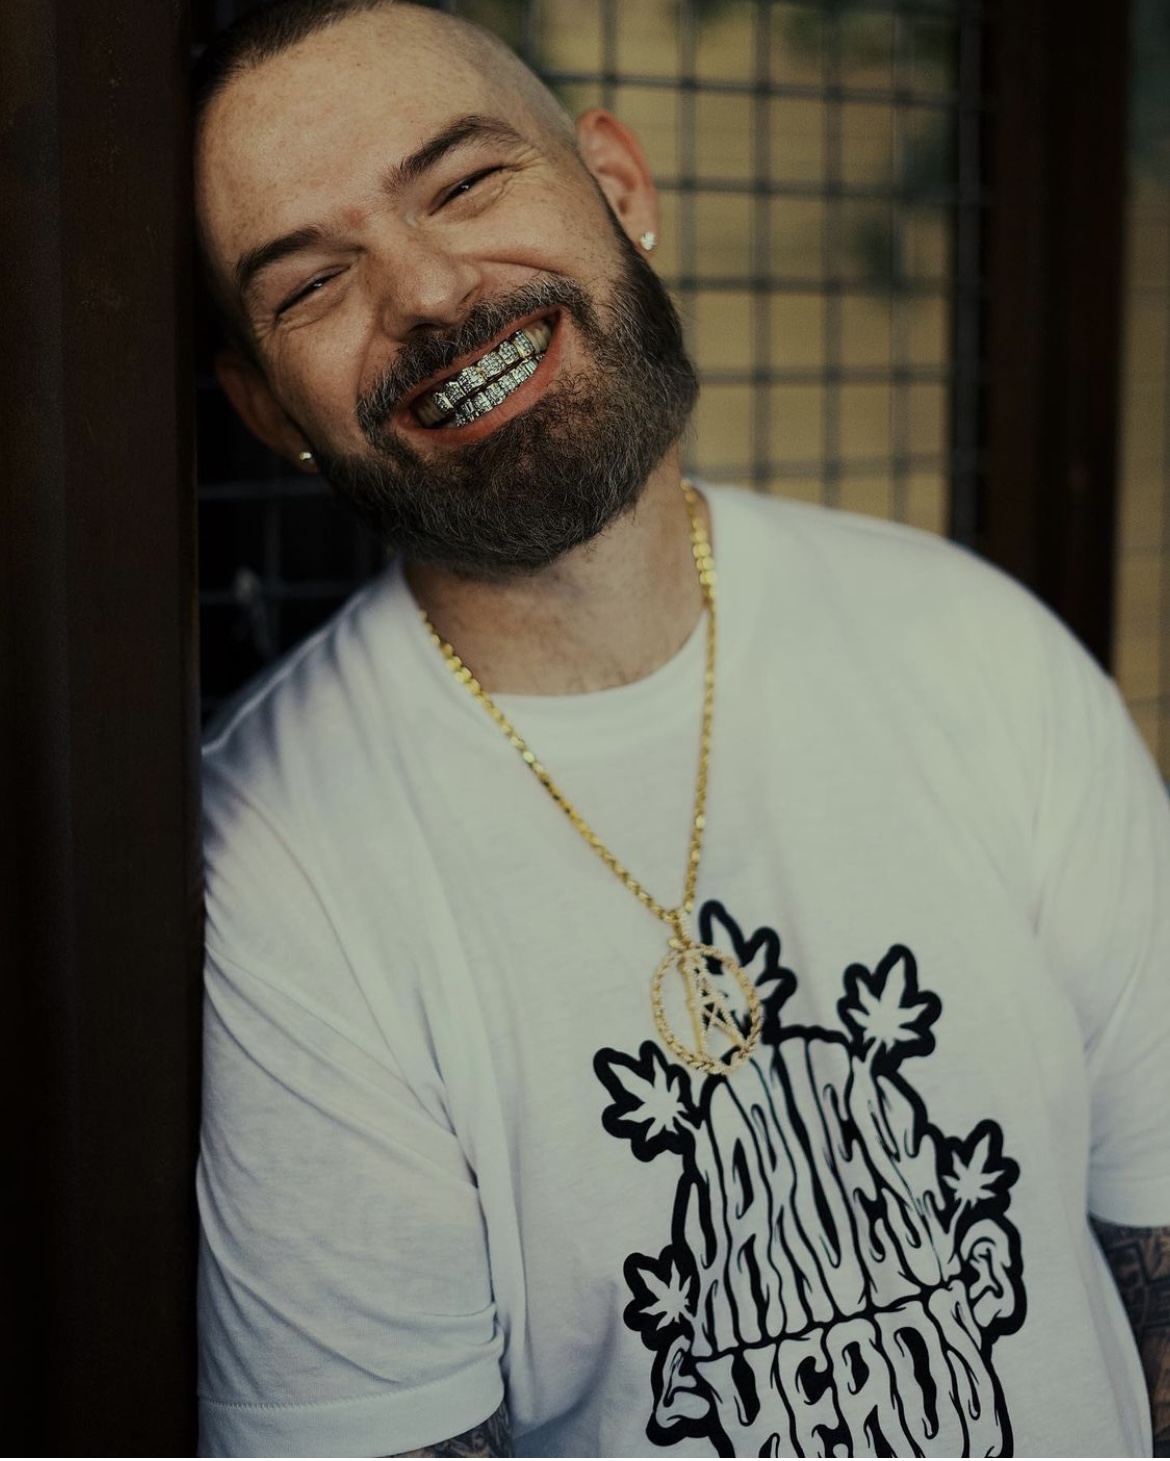 Rapper Paul Wall is a silver fox now, according to the internet